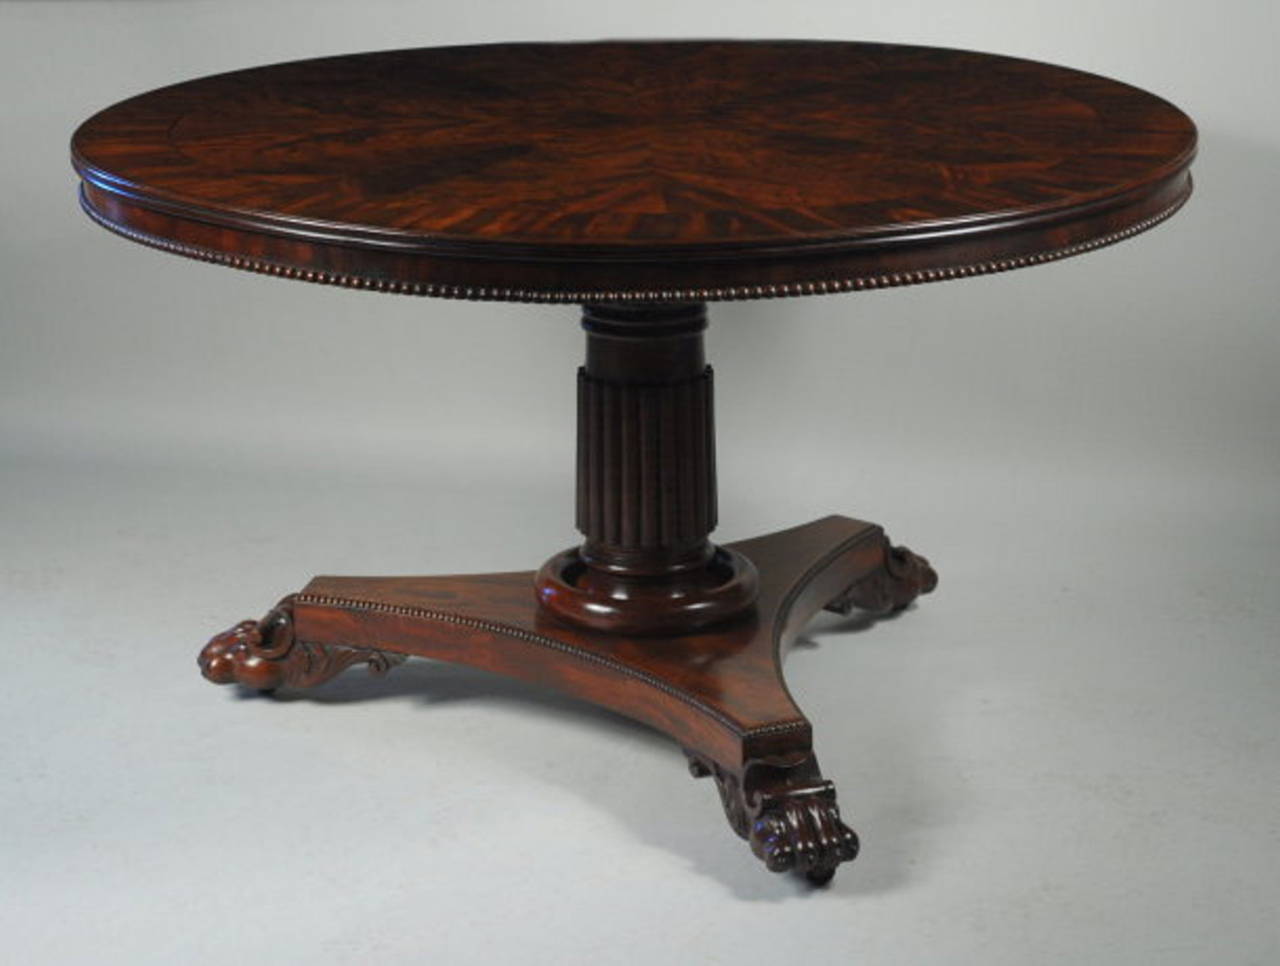 Exceptional Regency round library or center table with radiating
pie wedge figured mahogany veneered top with crossbanded edge, above a shallow apron with carved lower edge, tipping on a turned and reeded column supported on a triangular plinth